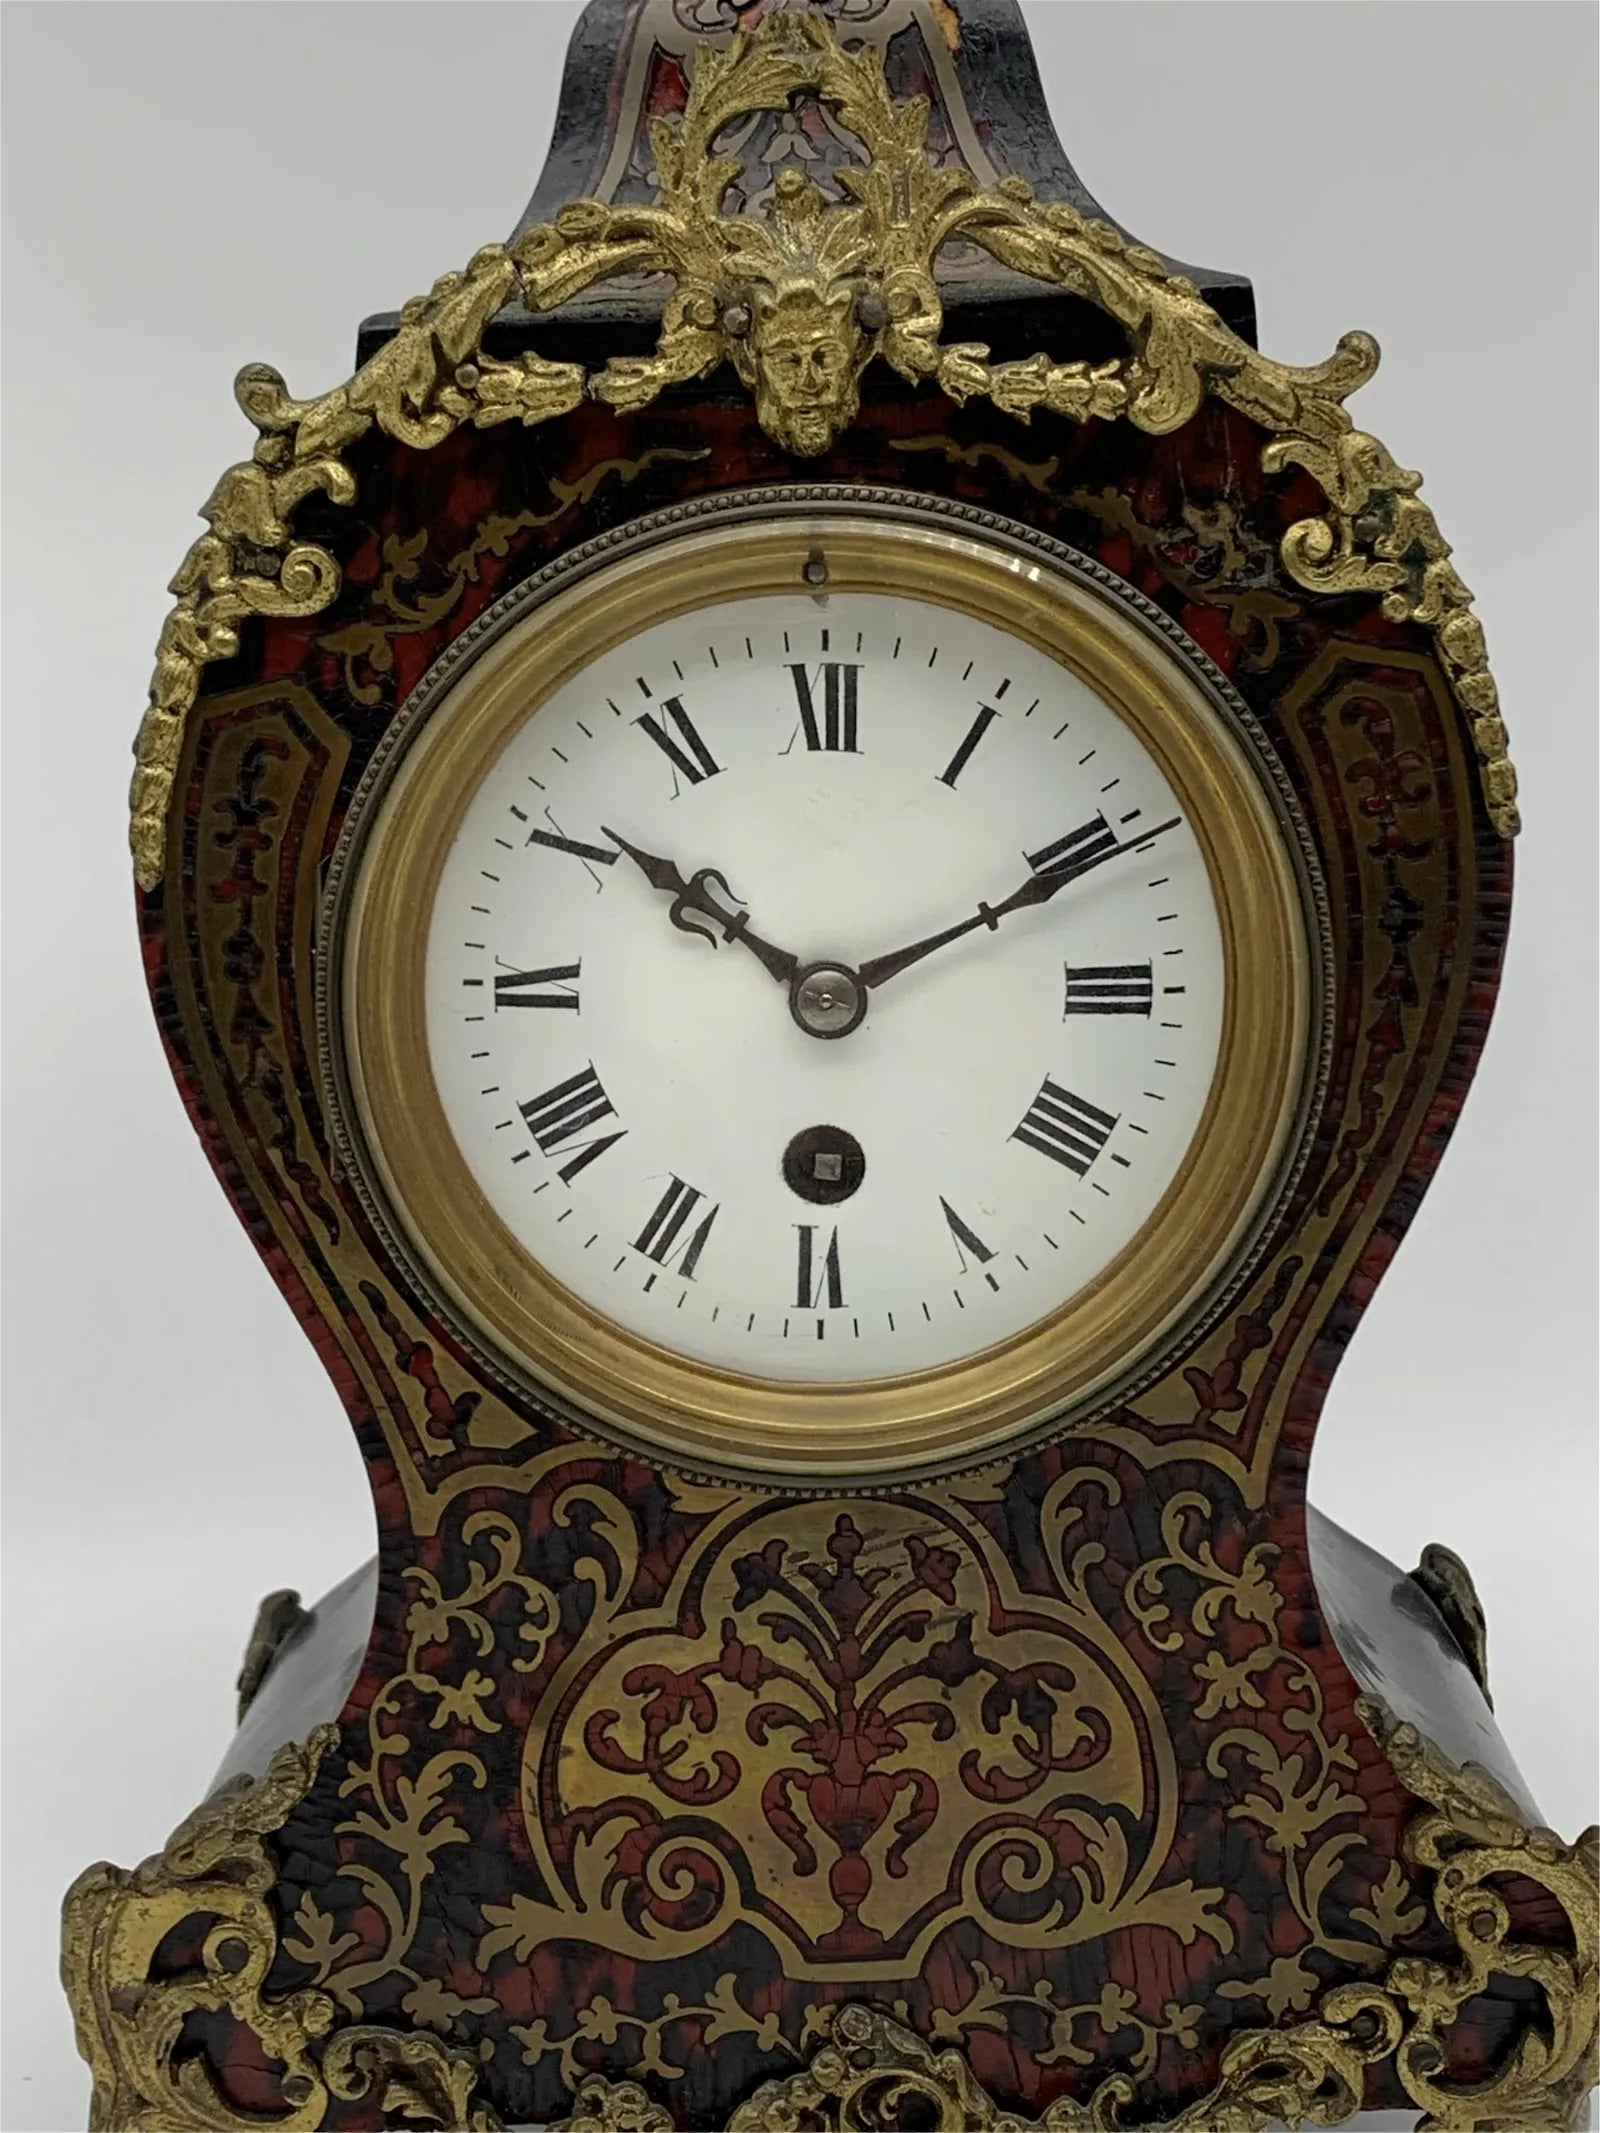 TK2-041: Mid 19th Century Louis XV Style MarquetryBoulle Mantle Clock.